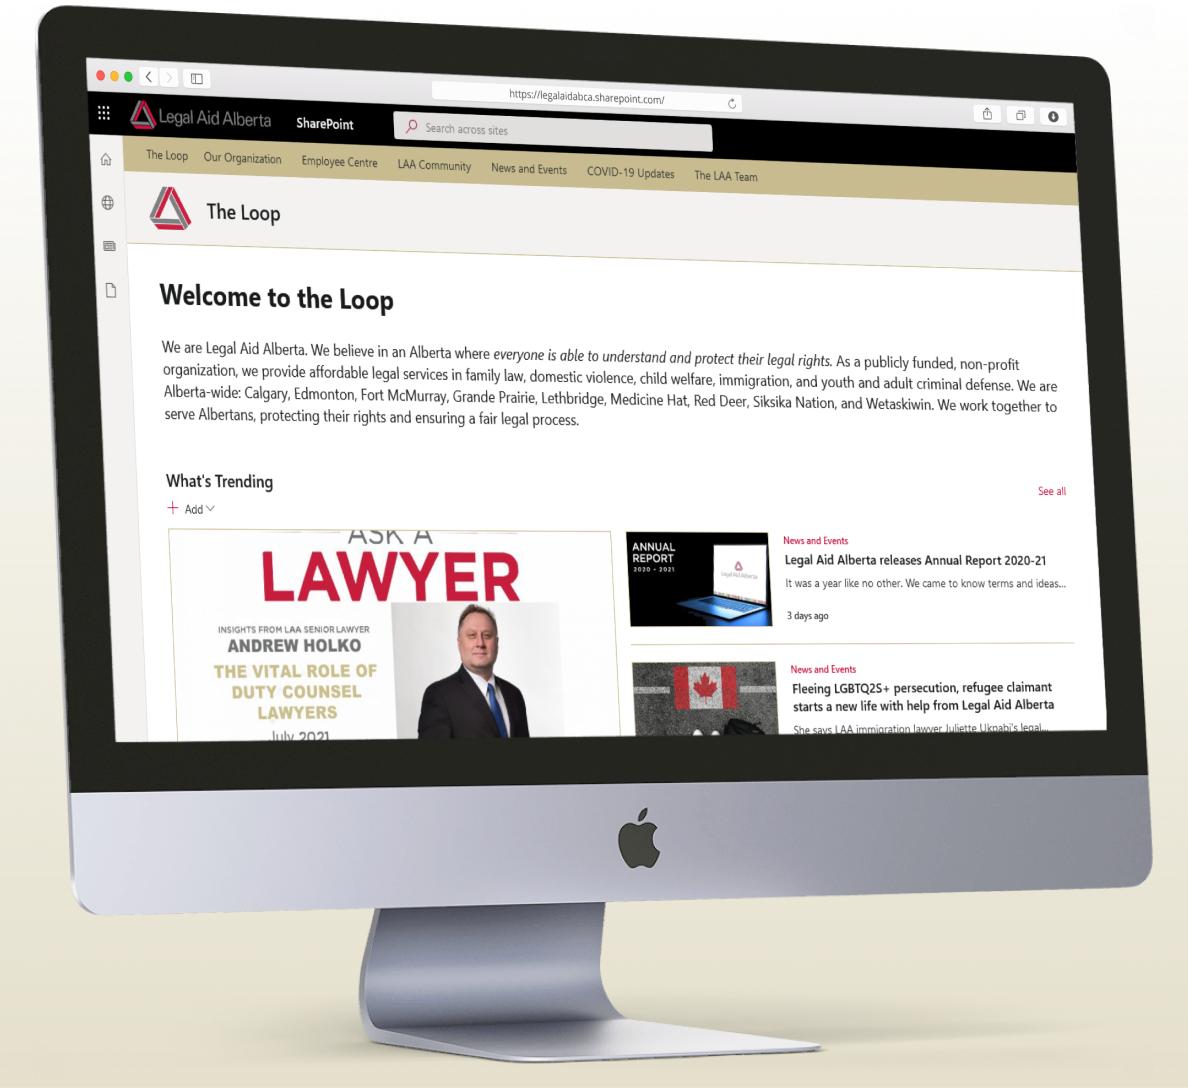 The home page of Legal Aid Alberta's digital workplace displayed on a monitor.